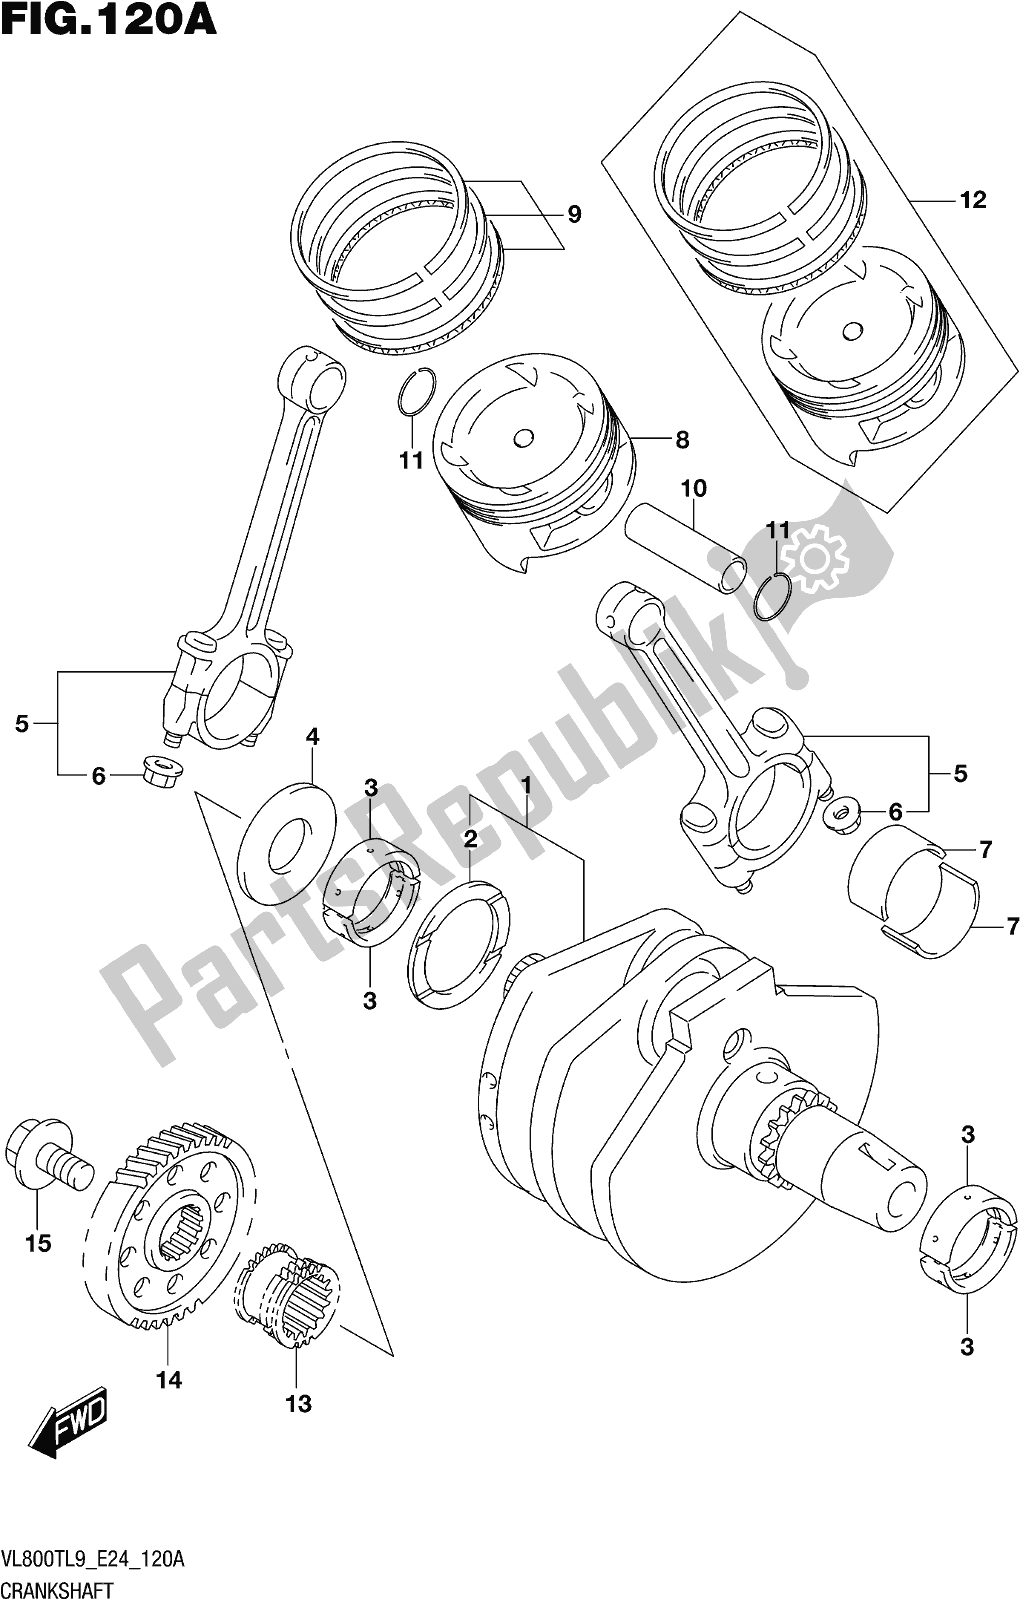 All parts for the Fig. 120a Crankshaft of the Suzuki VL 800T 2019